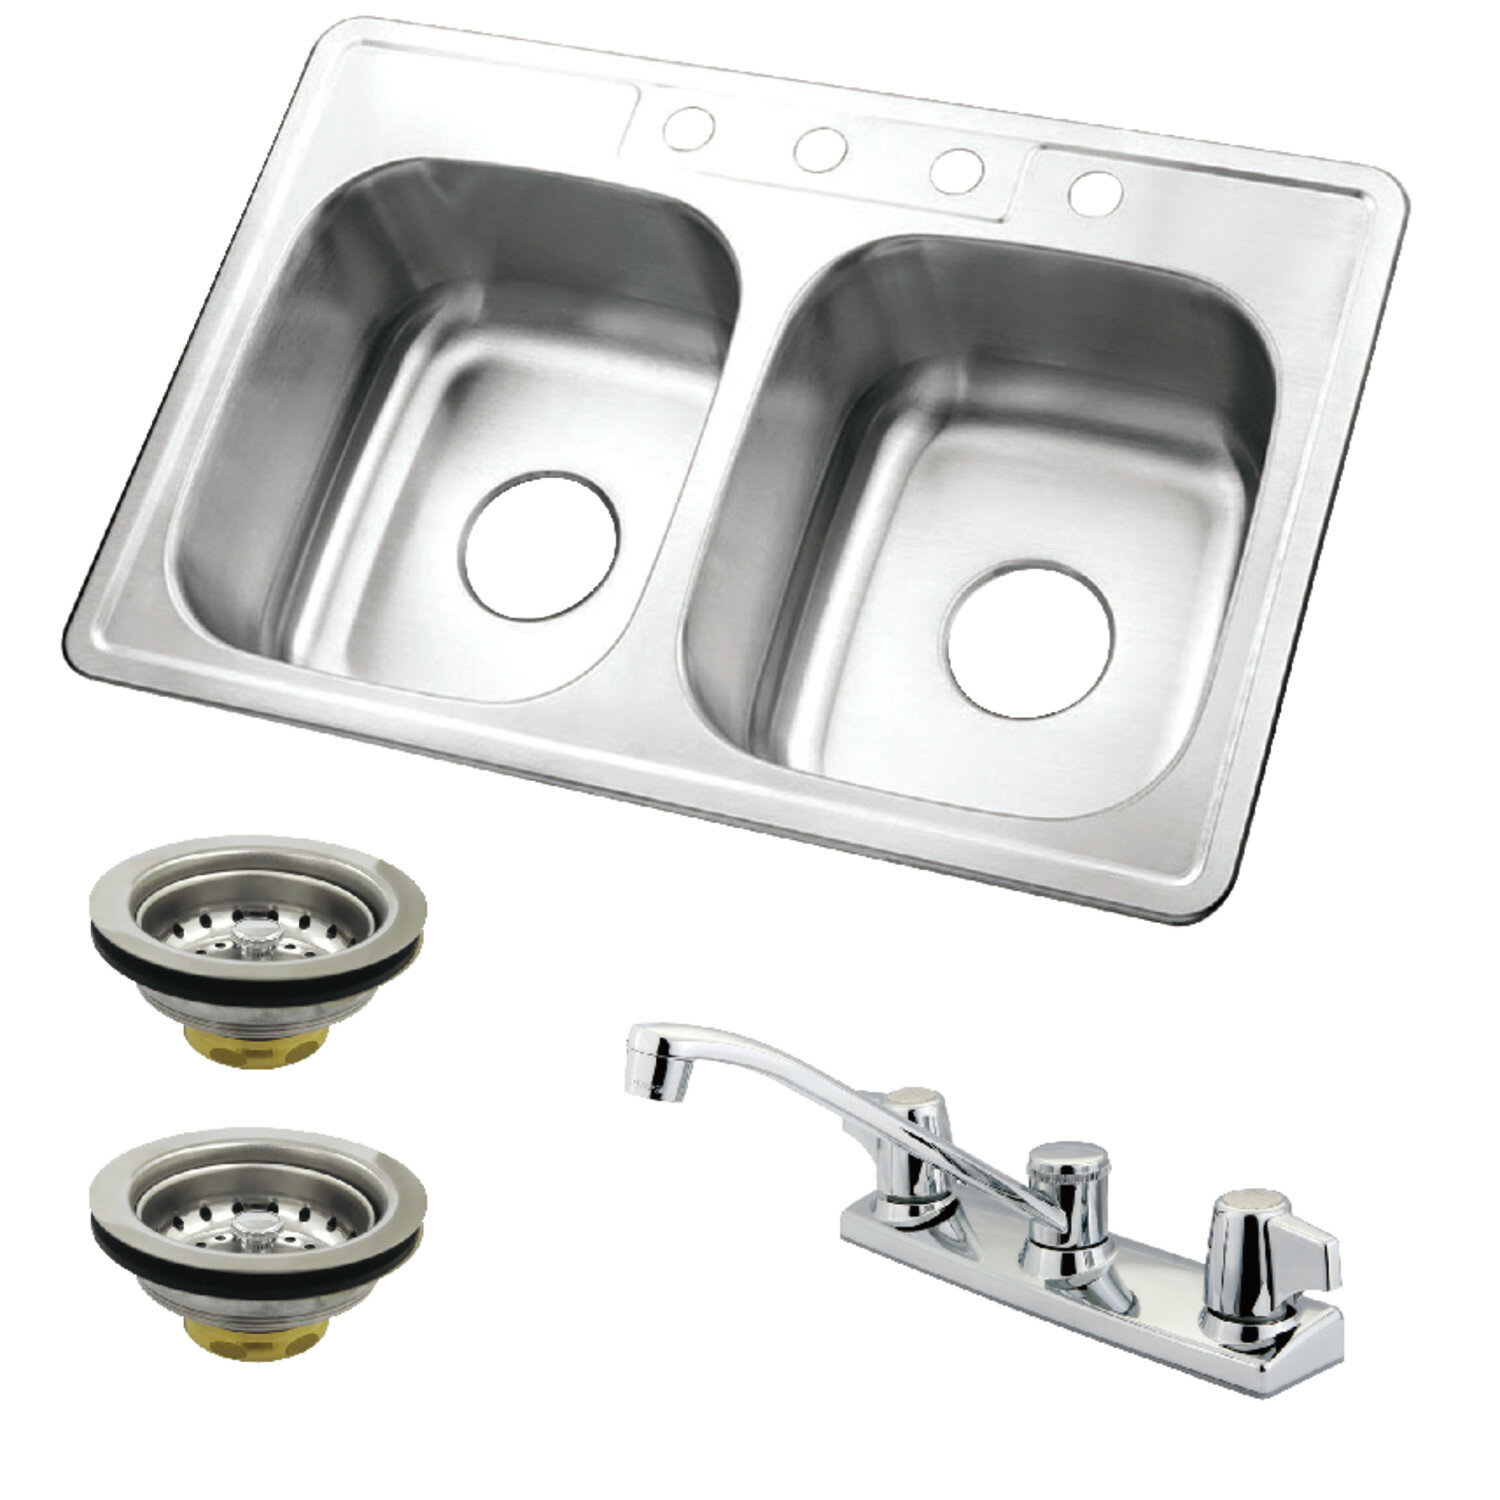 Details About 33 L X 22 W Double Basin Undermount Kitchen Sink With Faucet And Strainer